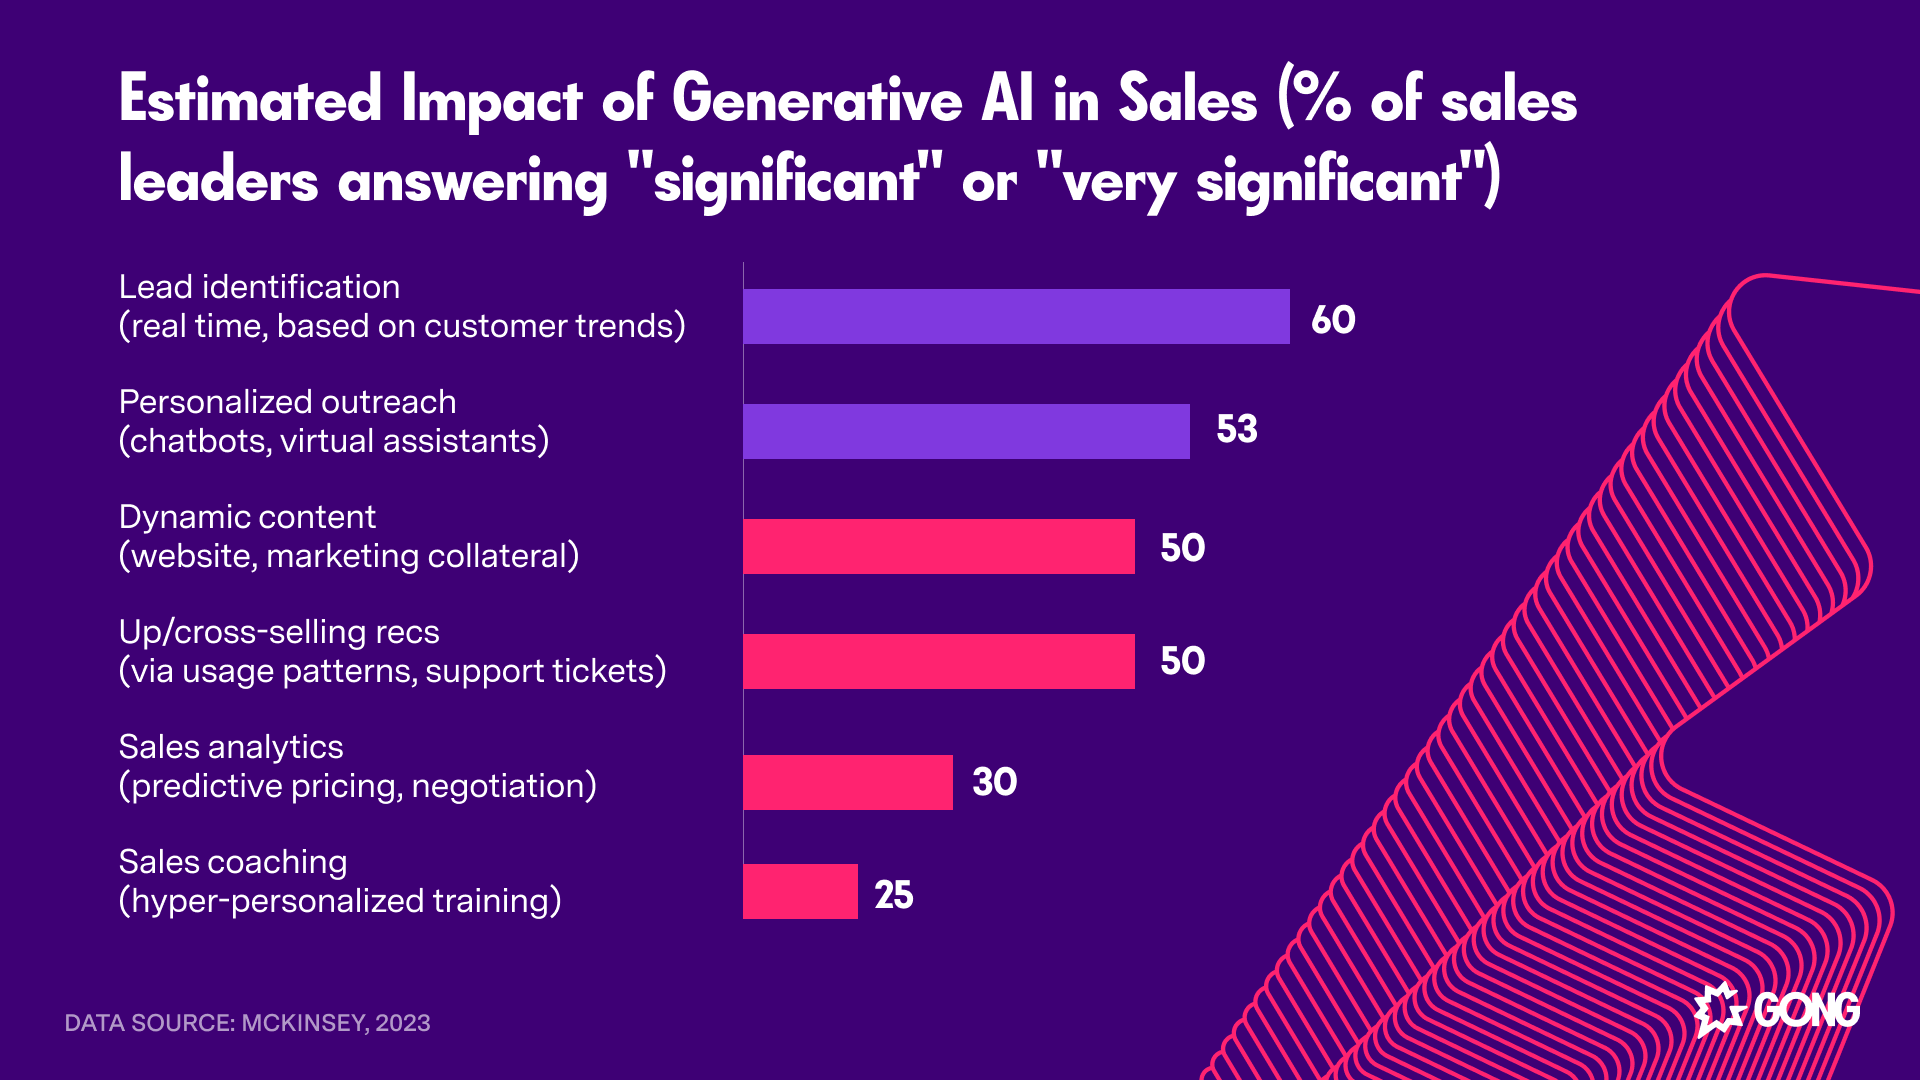 Survey results for top use cases for generative AI in sales in 2023